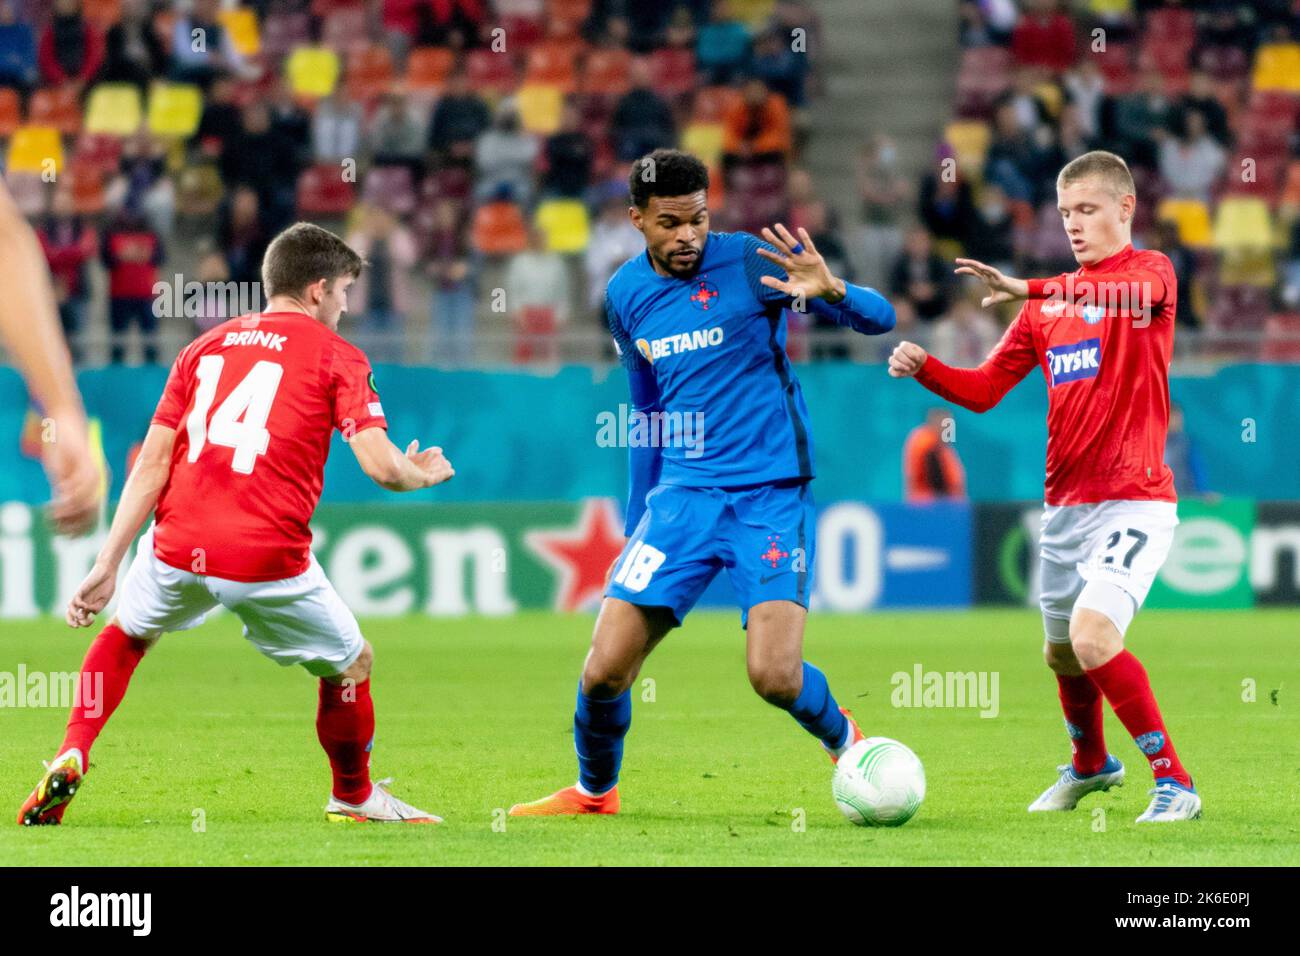 Bucharest, Romania. 13th Oct, 2022. October 13, 2022: Malcolm Edjouma #18 of FCSB and Sebastian Jorgensen #27 of Silkeborg IF during of the UEFA Europa Conference League group B match between FCSB Bucharest and Silkeborg IF at National Arena Stadium in Bucharest, Romania ROU. Catalin Soare/Cronos Credit: Cronos/Alamy Live News Stock Photo